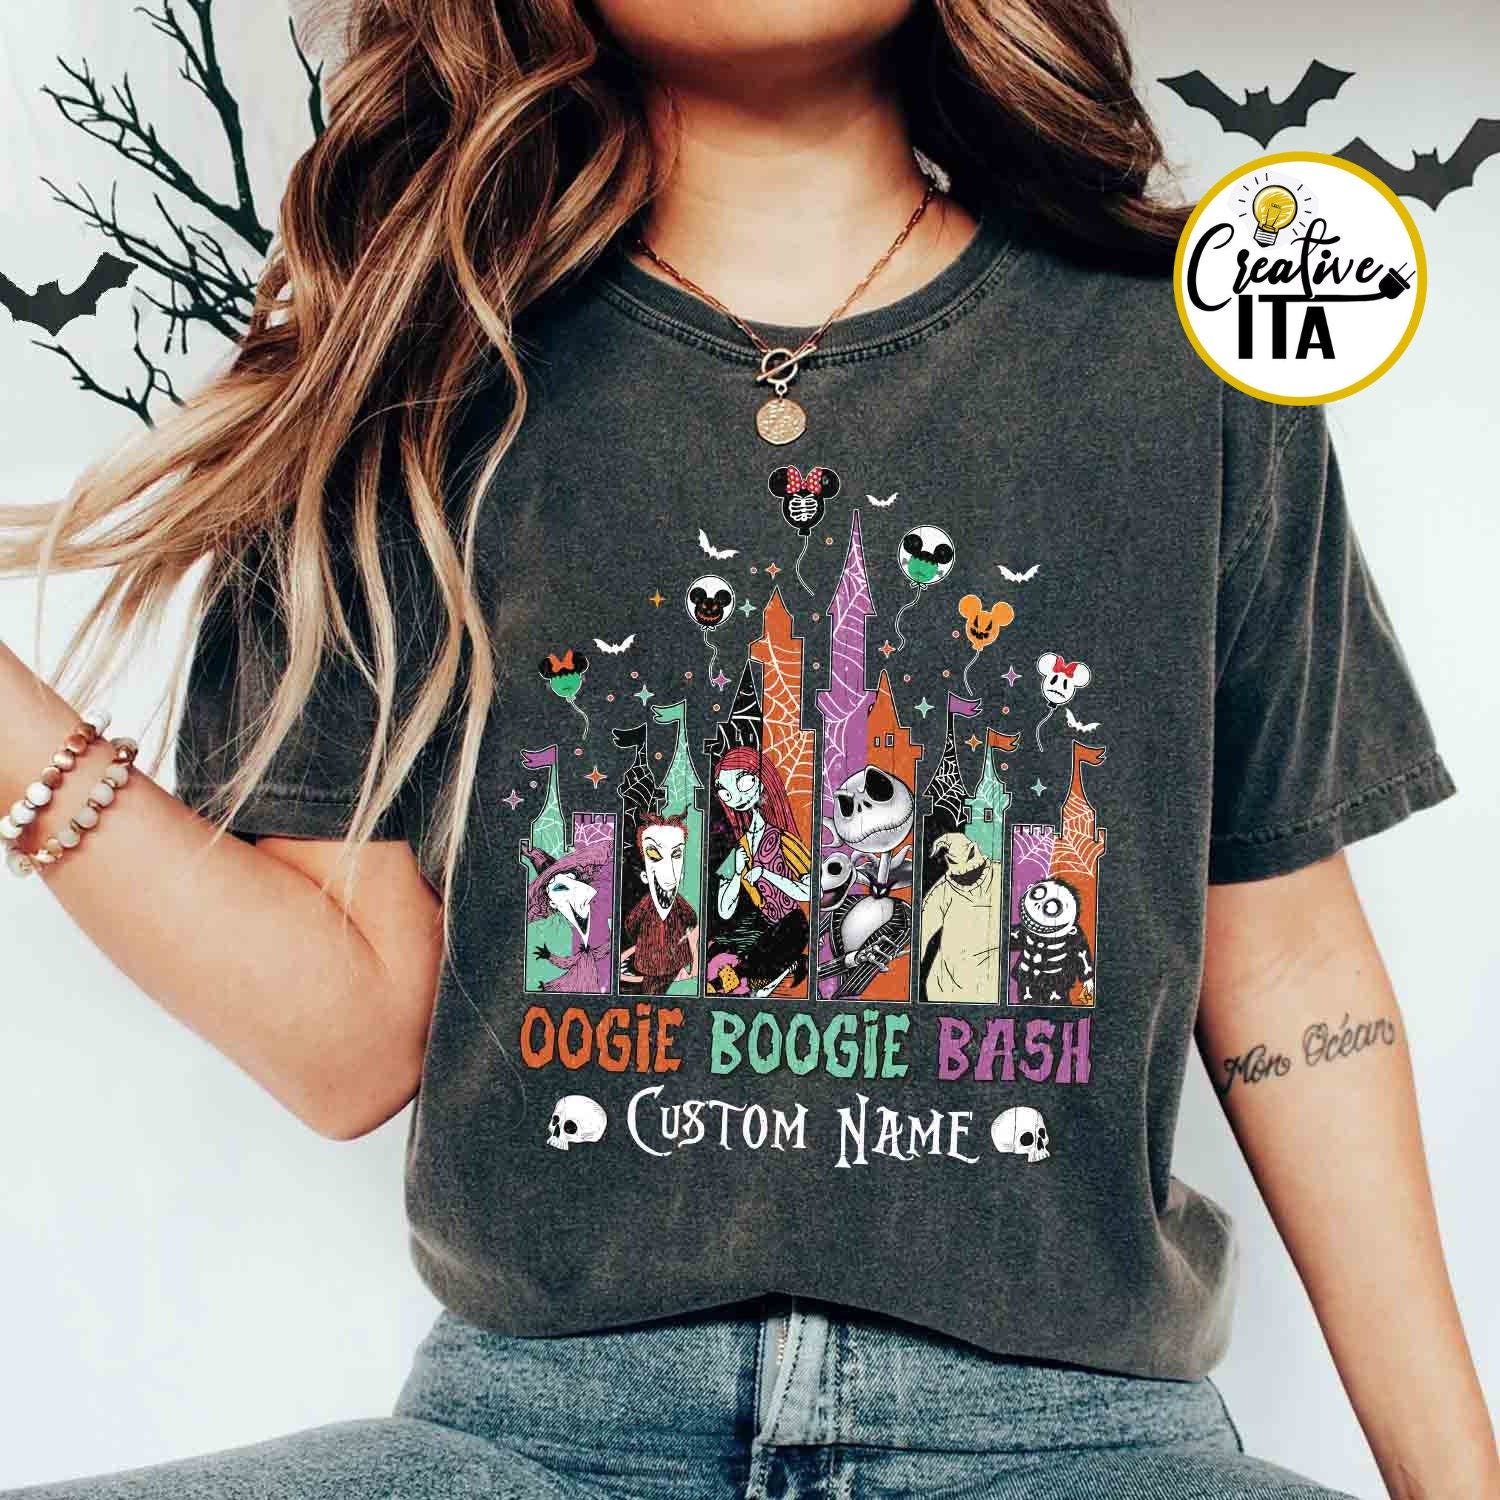 Vintage The Nightmare Before Christmas Shirt, Personalized Oogie Boogie Bash T-shirt, Disney Castle Halloween Shirts, Halloween Party Tees